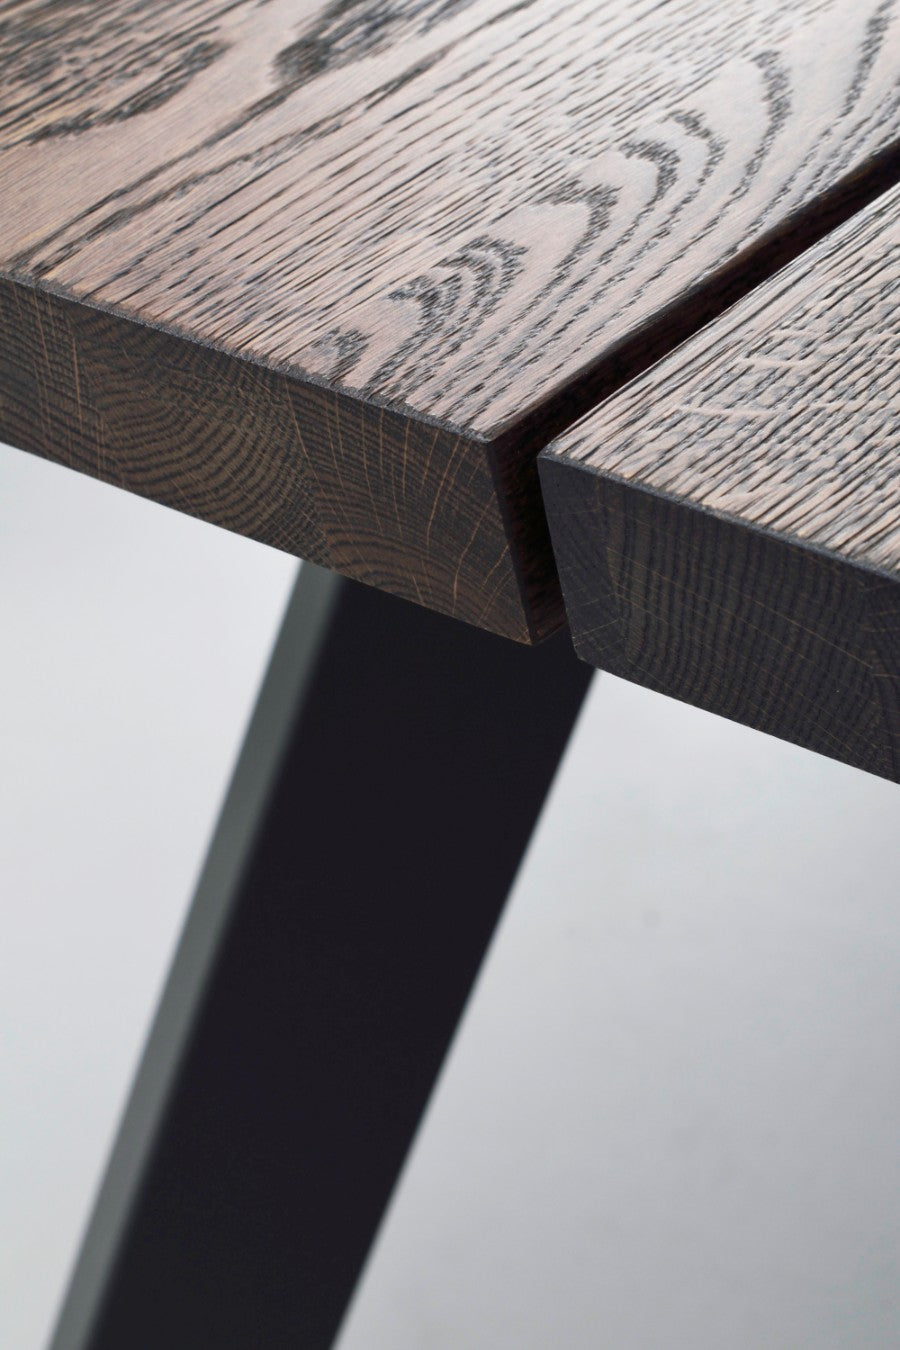 FRED Smoked Oak Dining Table 170CM